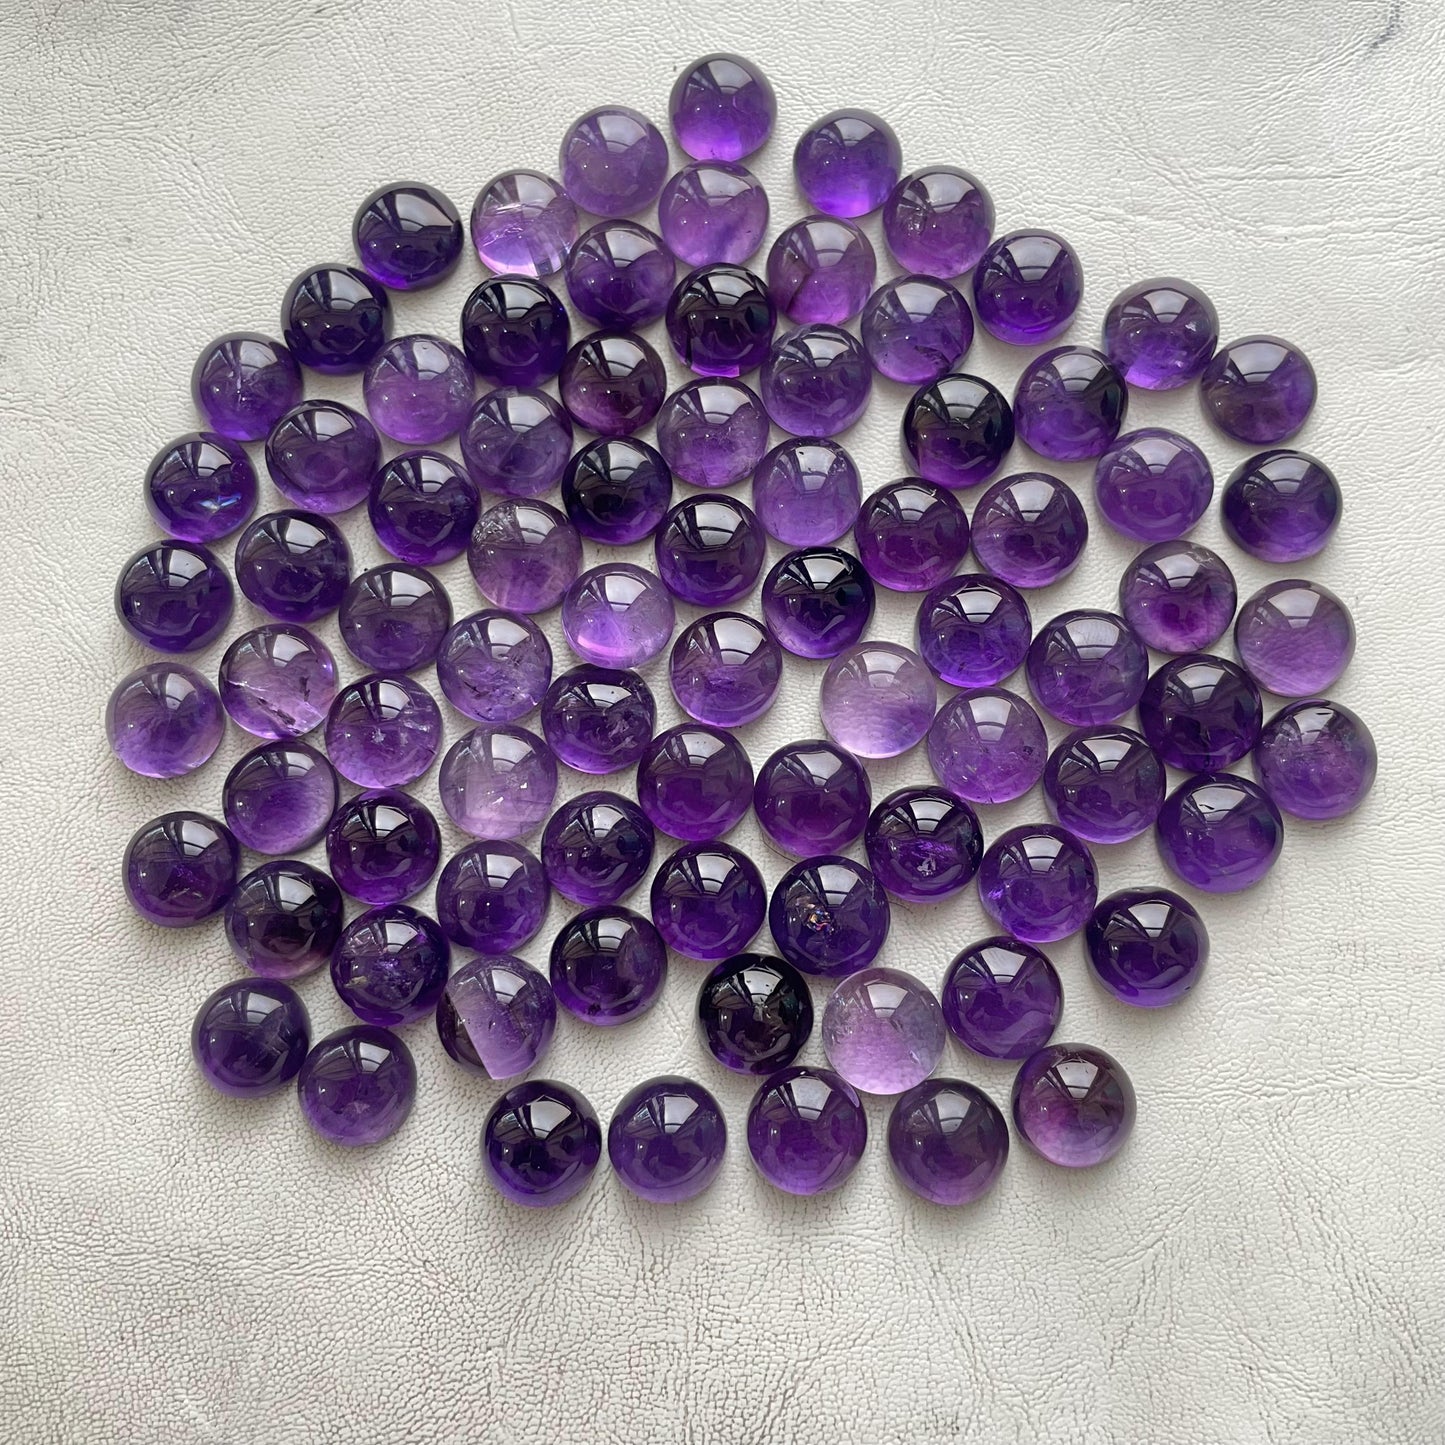 Purple Amethyst 14 mm Round Cabochon (Natural)